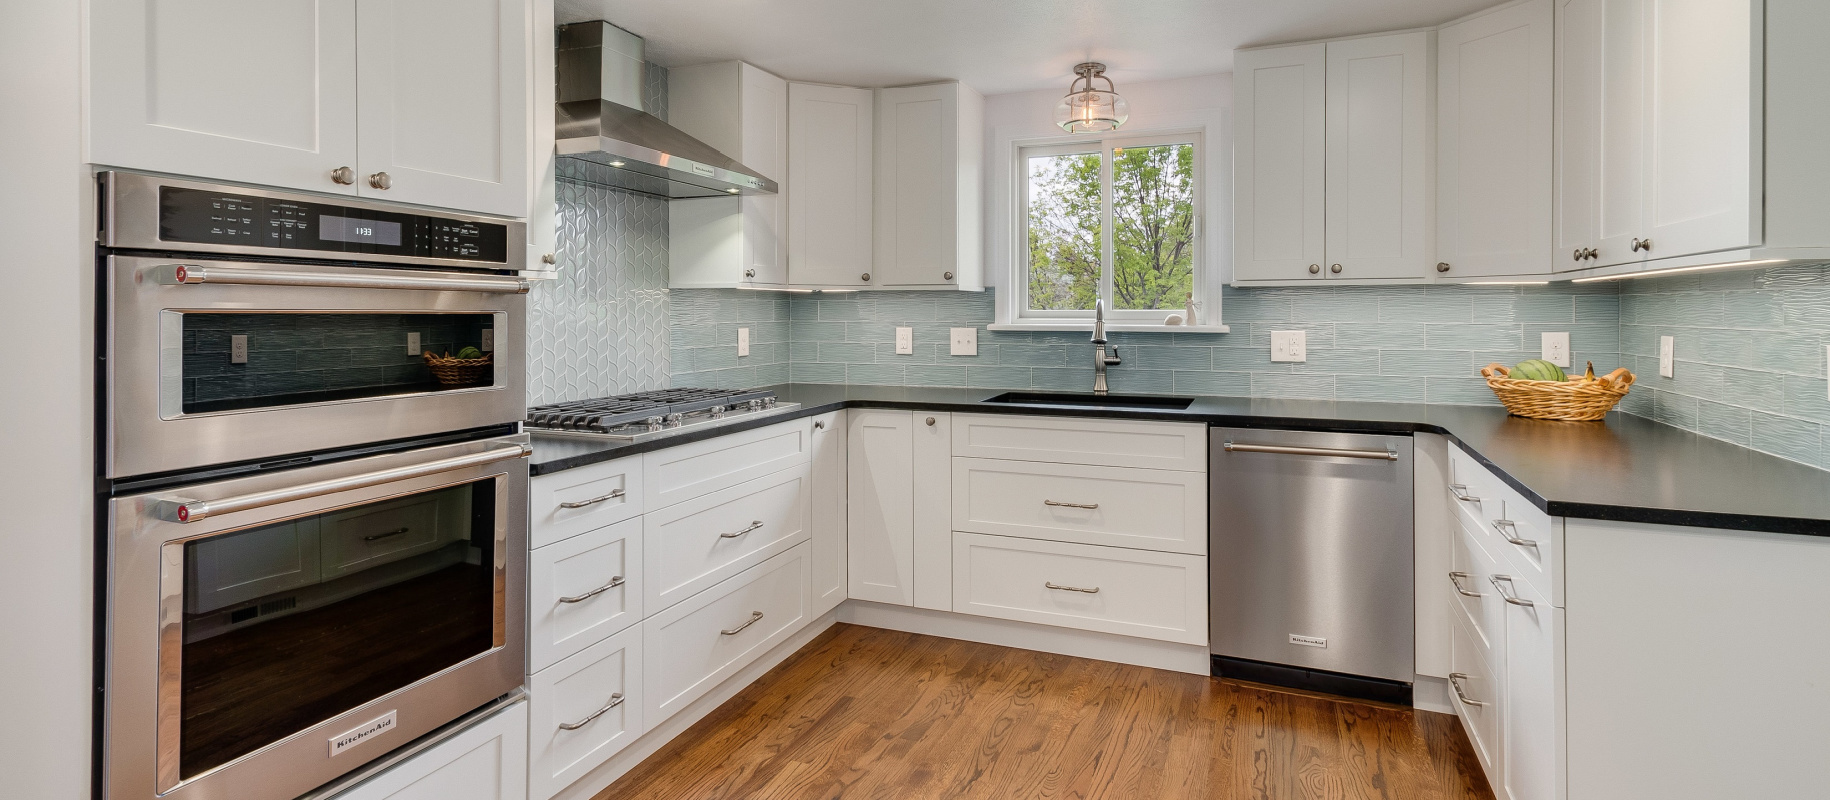 How Can I Buy Showplace Cabinets?